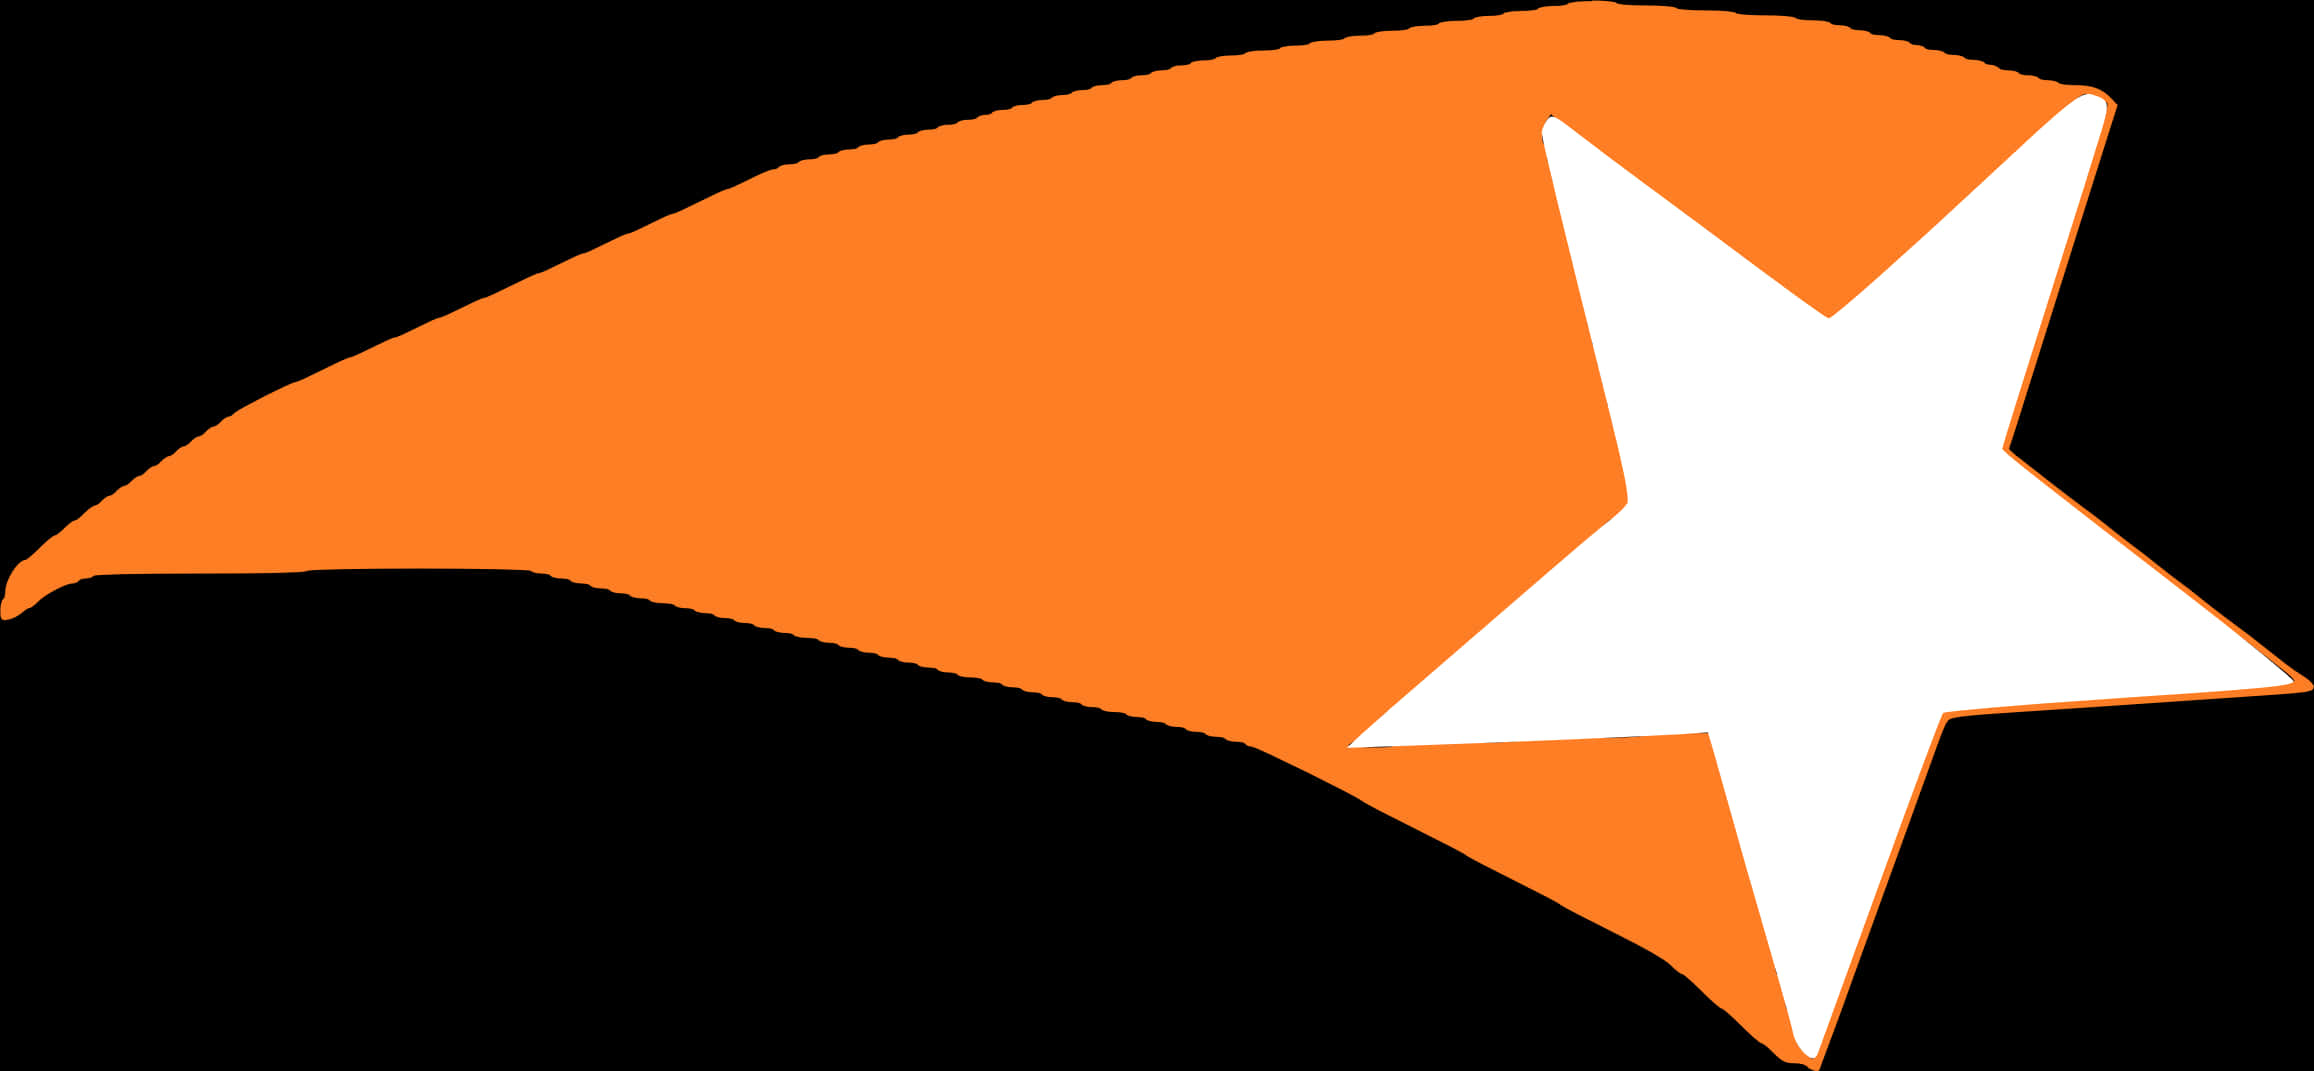 A White Star On An Orange And Black Background